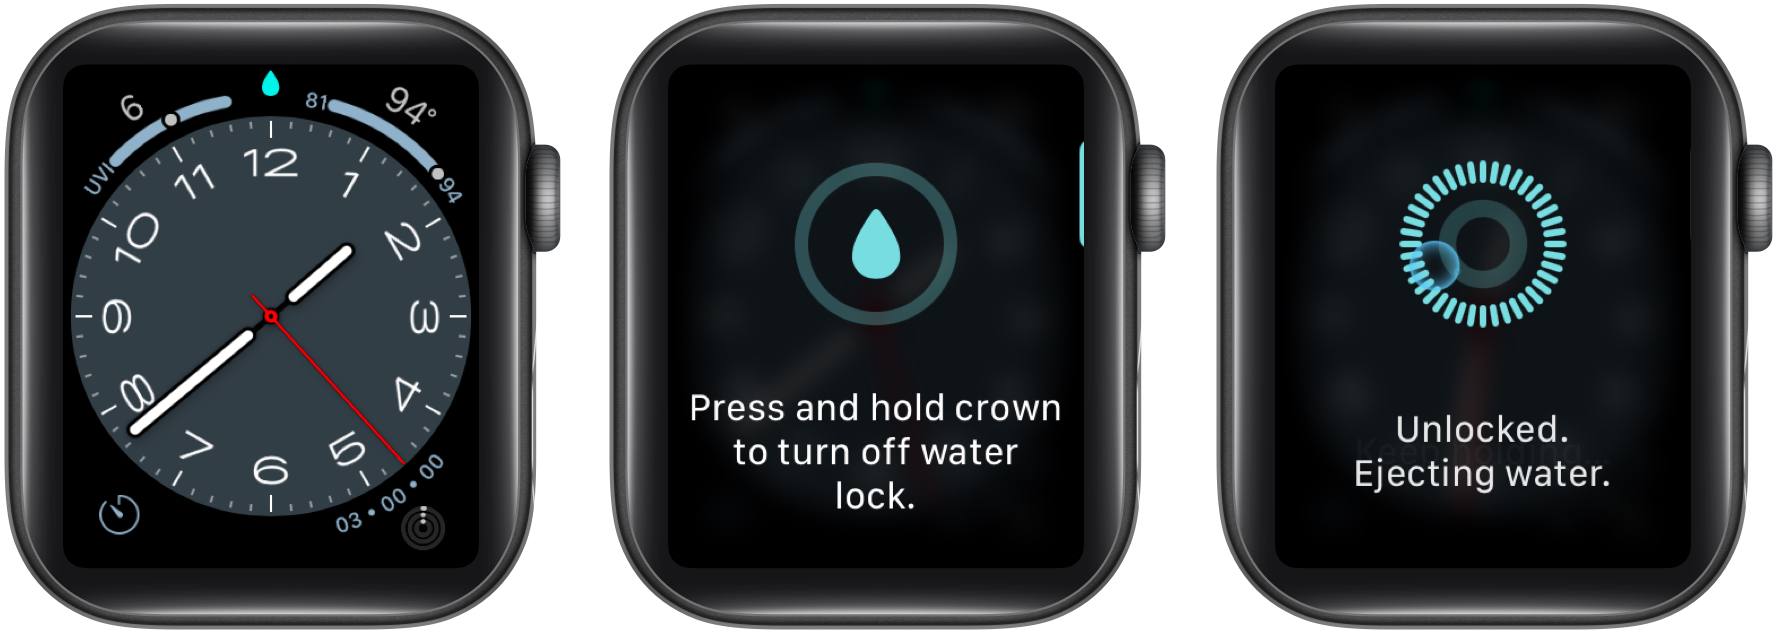 Option to disable the Water Lock feature on the Apple Watch.